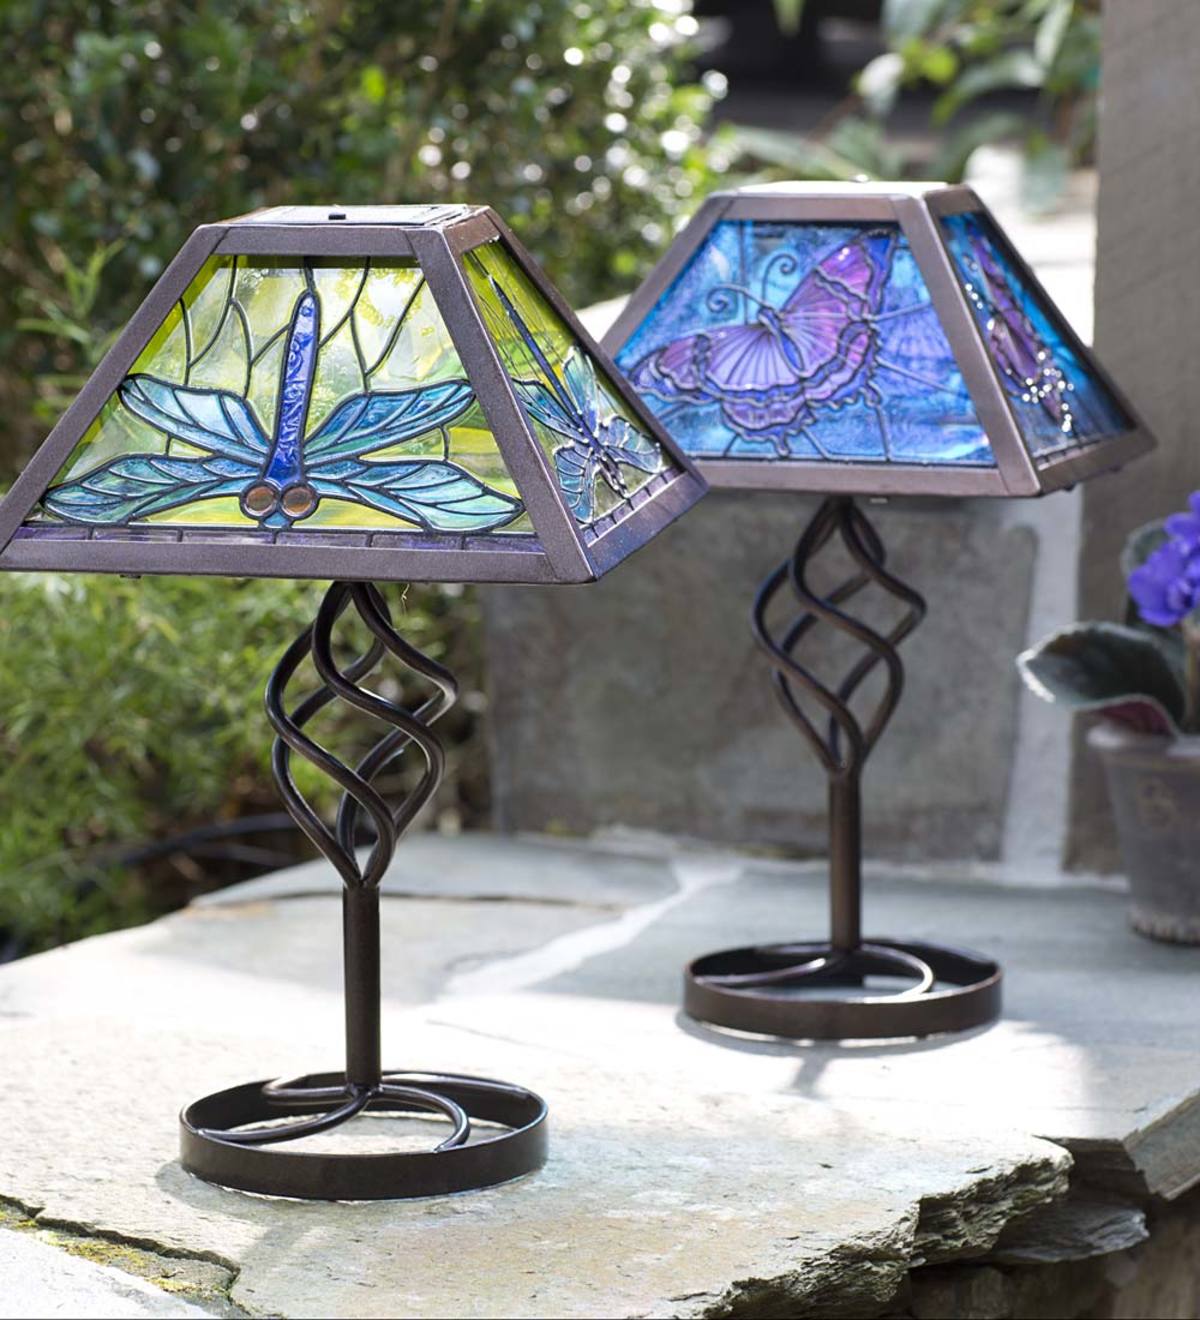 Tiffany-Style Stained Glass Solar Outdoor Table Accent Lamp